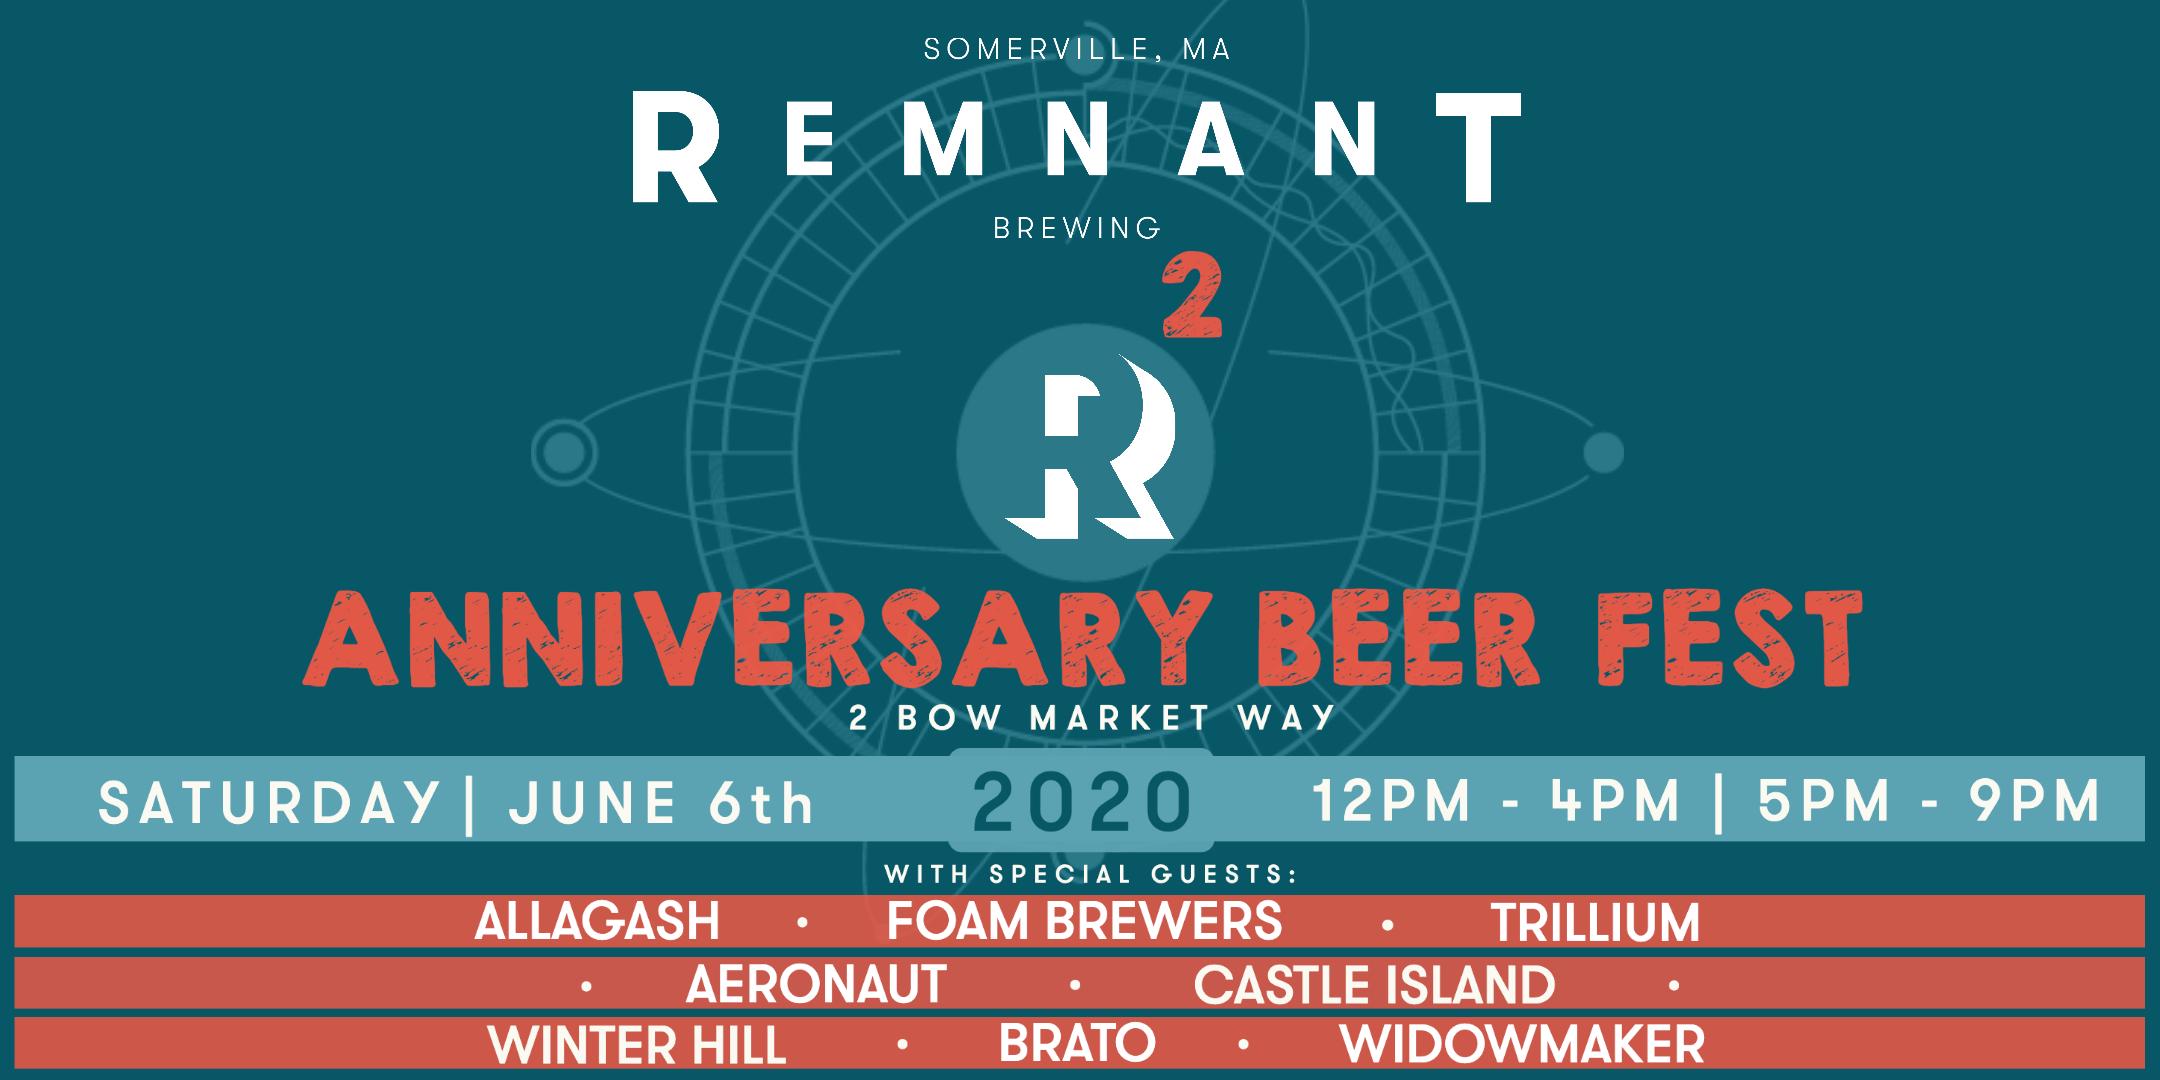 Remnant Anniversary Beer Fest